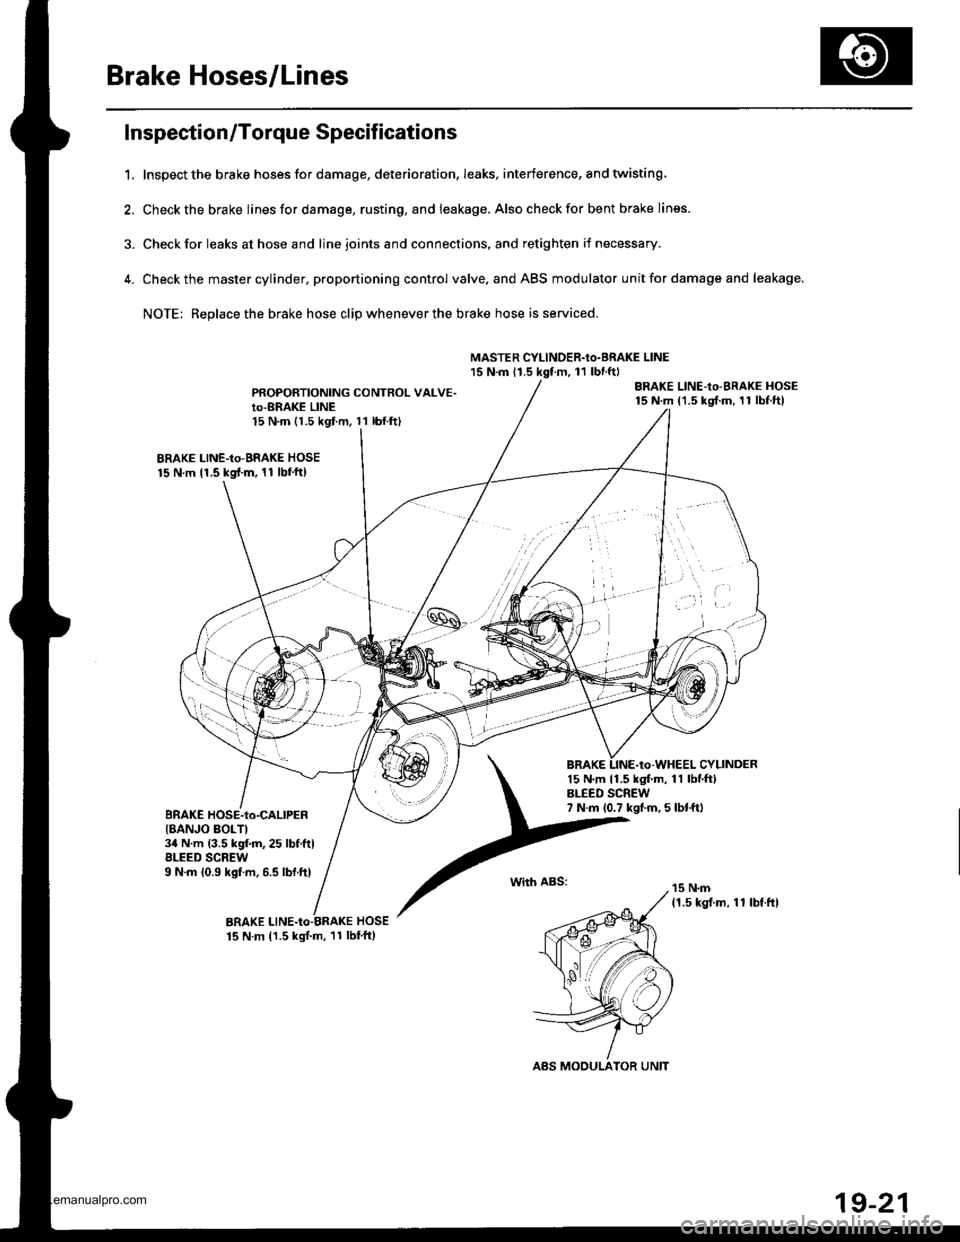 HONDA CR-V 1999 RD1-RD3 / 1.G Owners Manual 
Brake Hoses/Lines
Inspection/Torque Specif ications
1. Inspect the brake hoses for damage, deterioration, leaks, interference, and twisting
2. Check the brake Iines for damage, rusting, and leakage. 